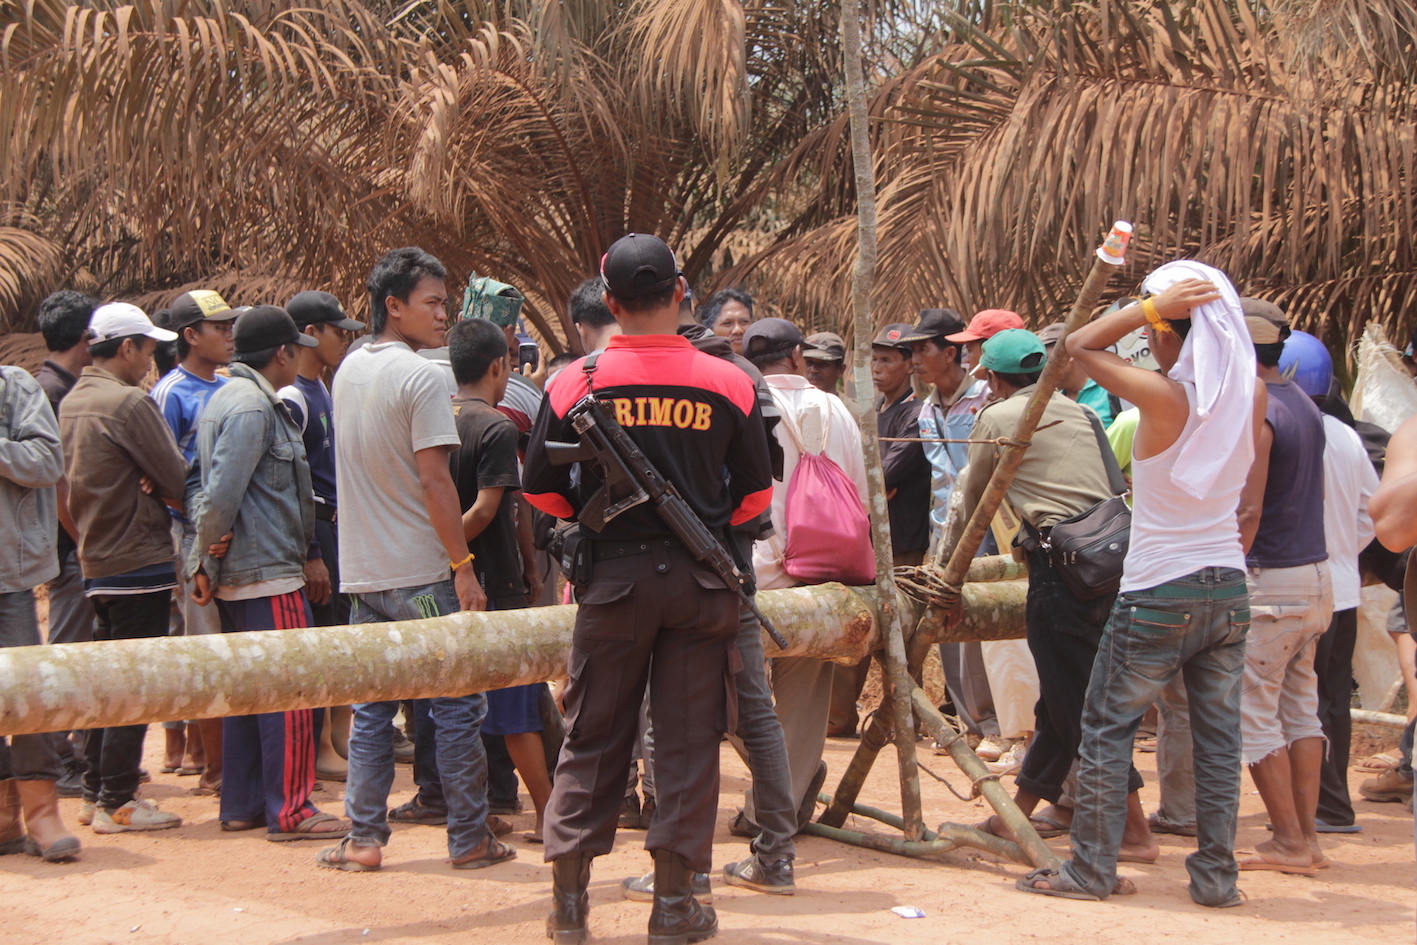 Community members blockade a road to protest a palm oil plantation in Gunung Mas district, Central Kalimantan - Save Our Borneo